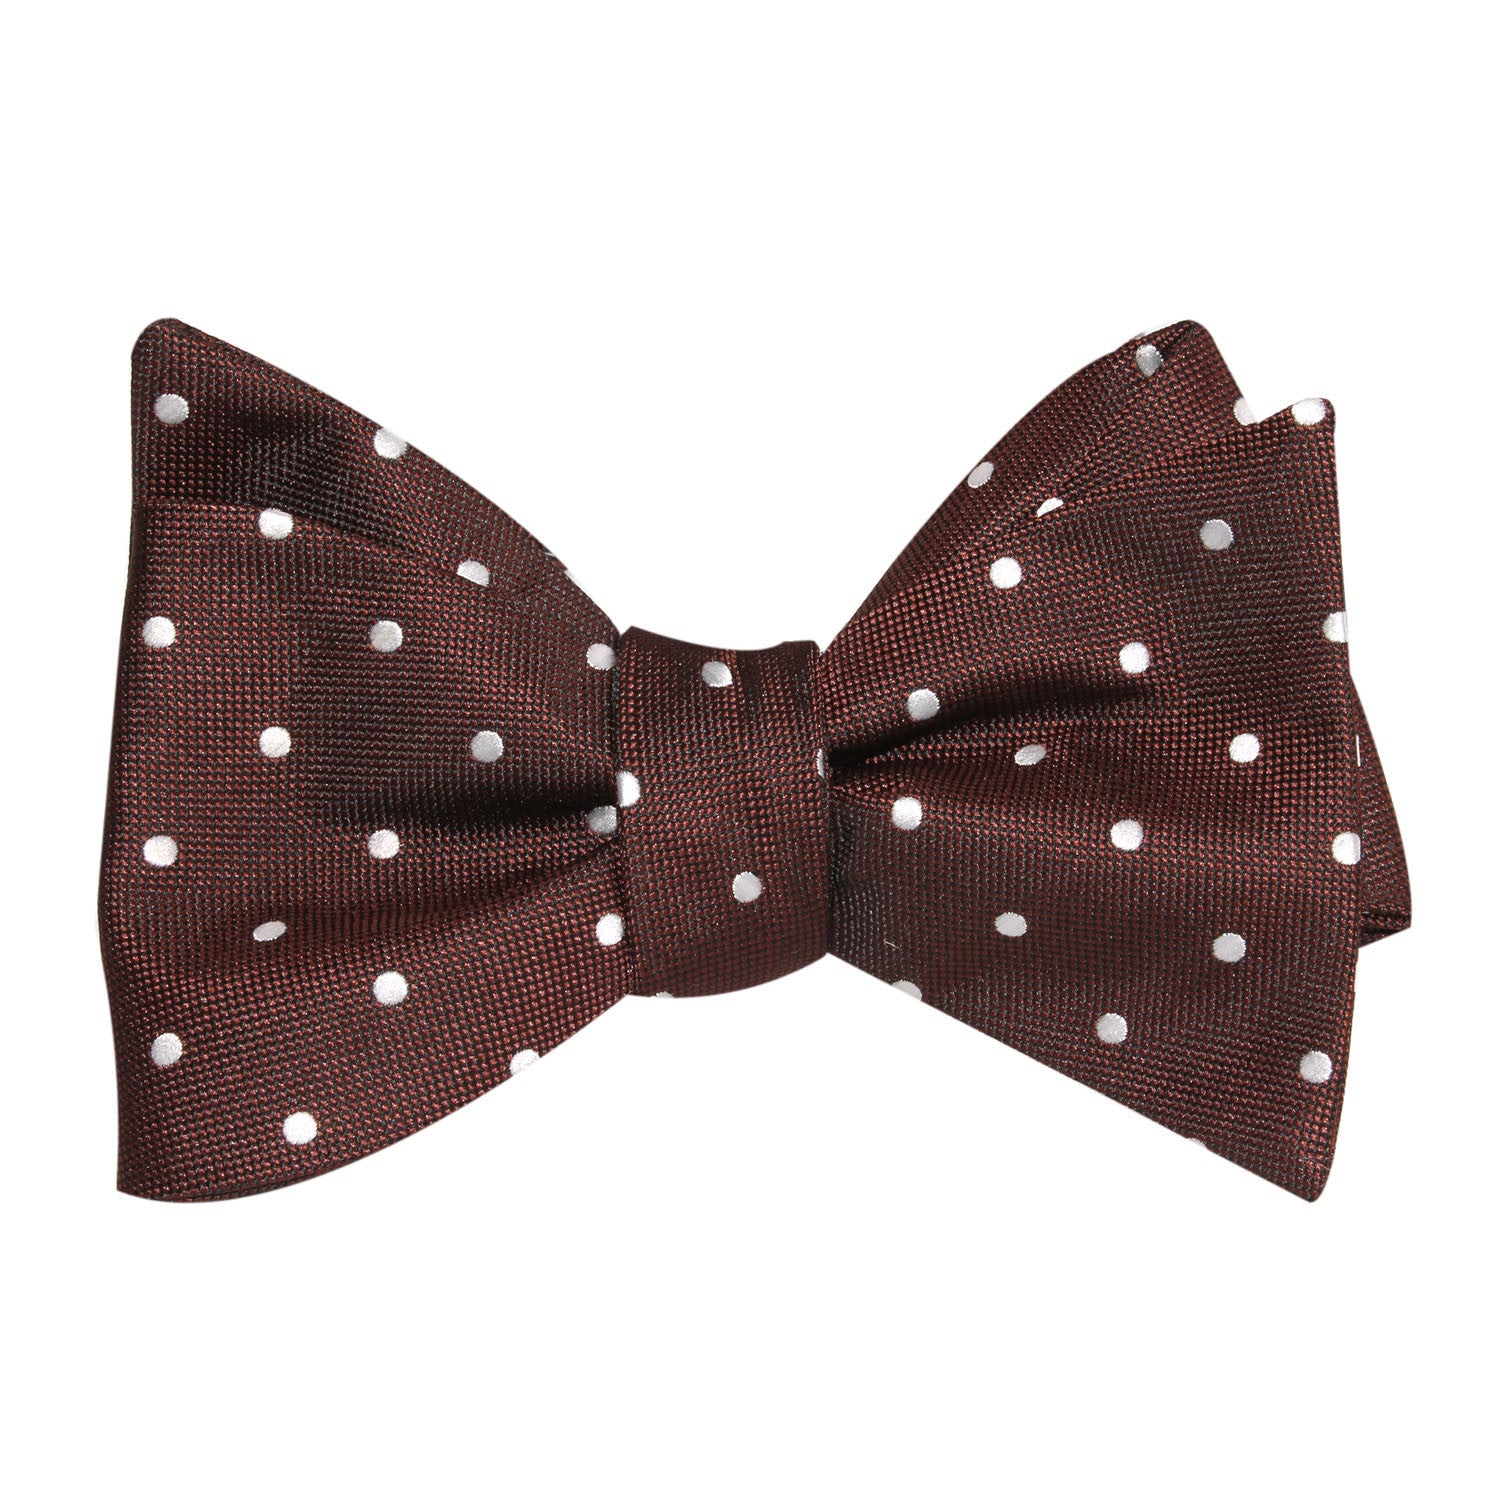 Brown with White Polka Dots Self Tie Bow Tie 1